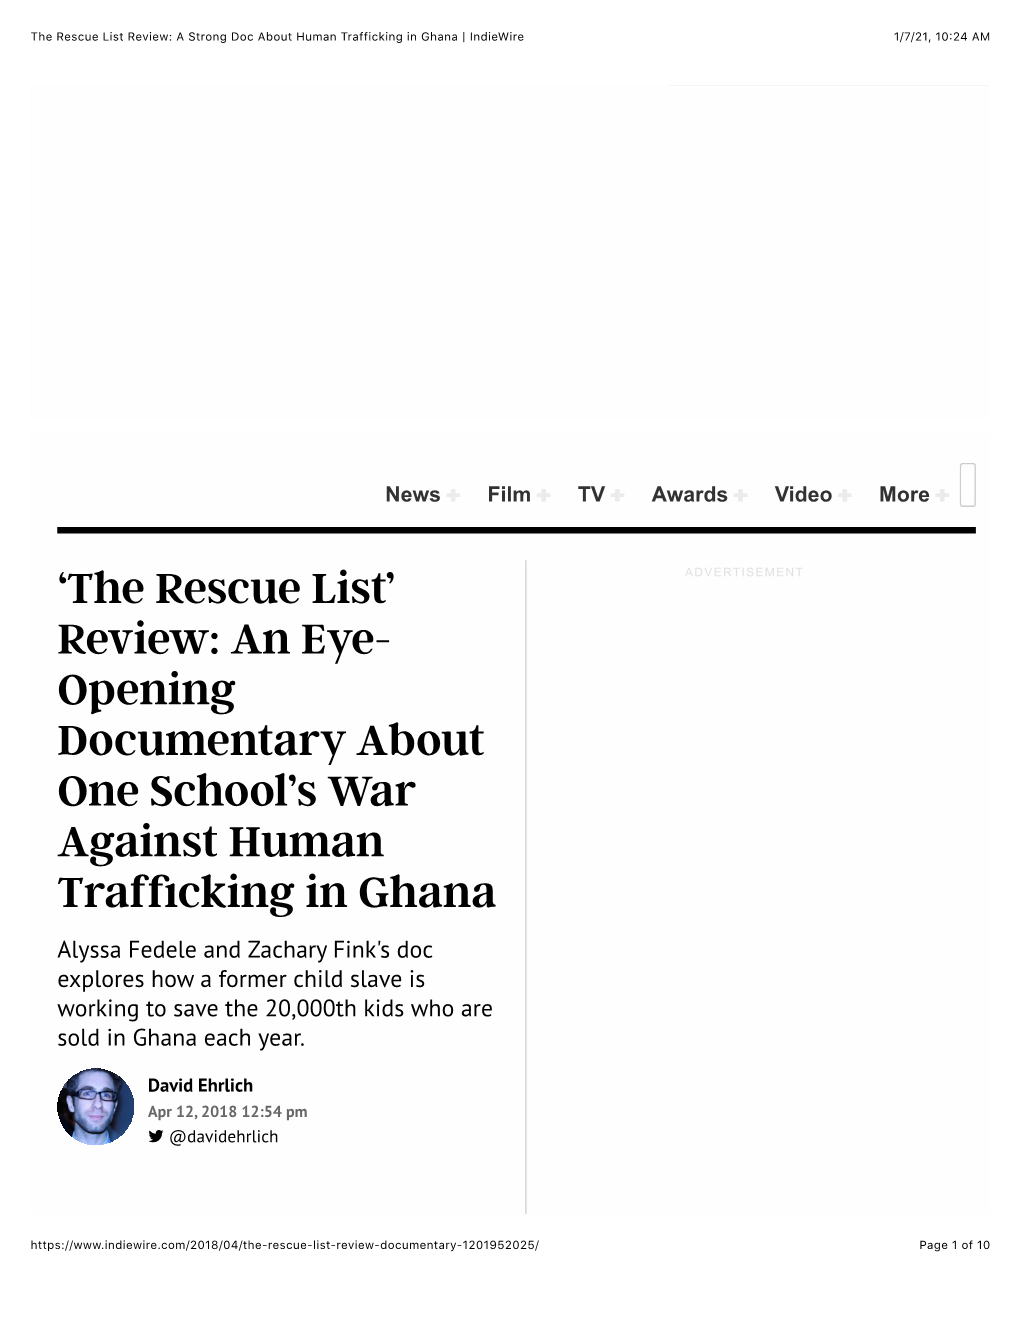 The Rescue List Review: a Strong Doc About Human Trafficking in Ghana | Indiewire 1/7/21, 10:24 AM